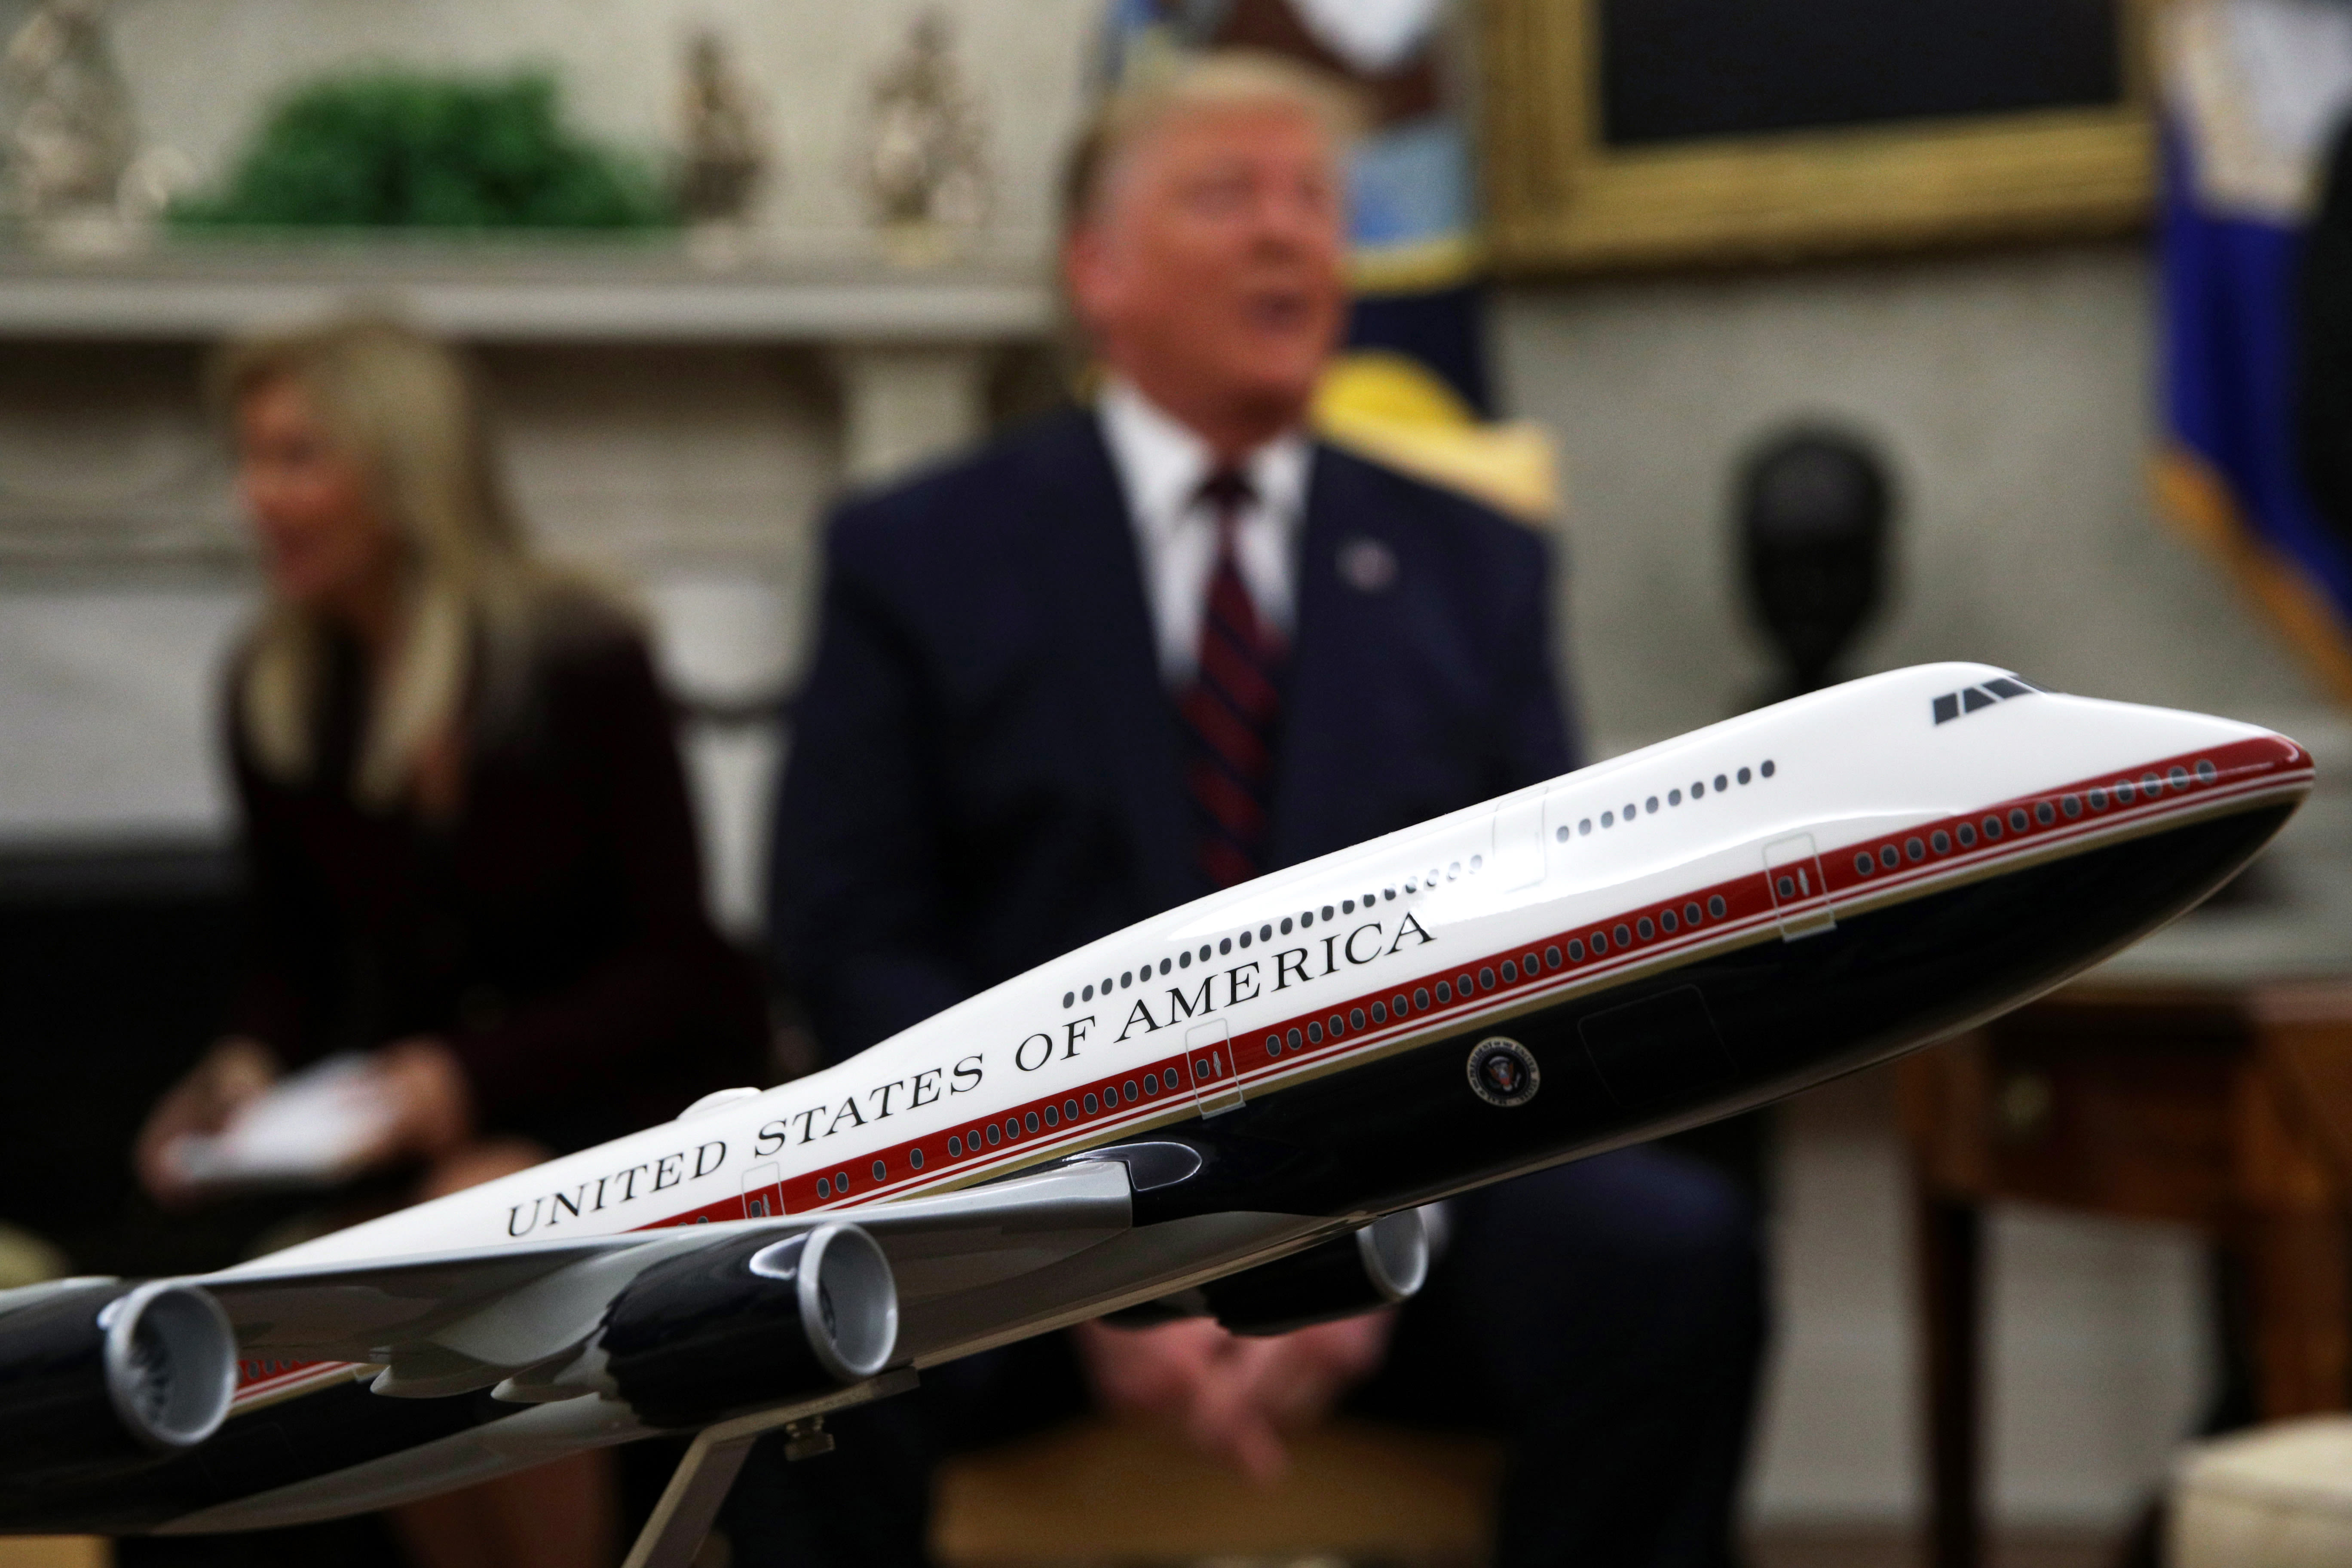 Trump would ‘absolutely’ scrap Biden’s Air Force One colors, adviser says